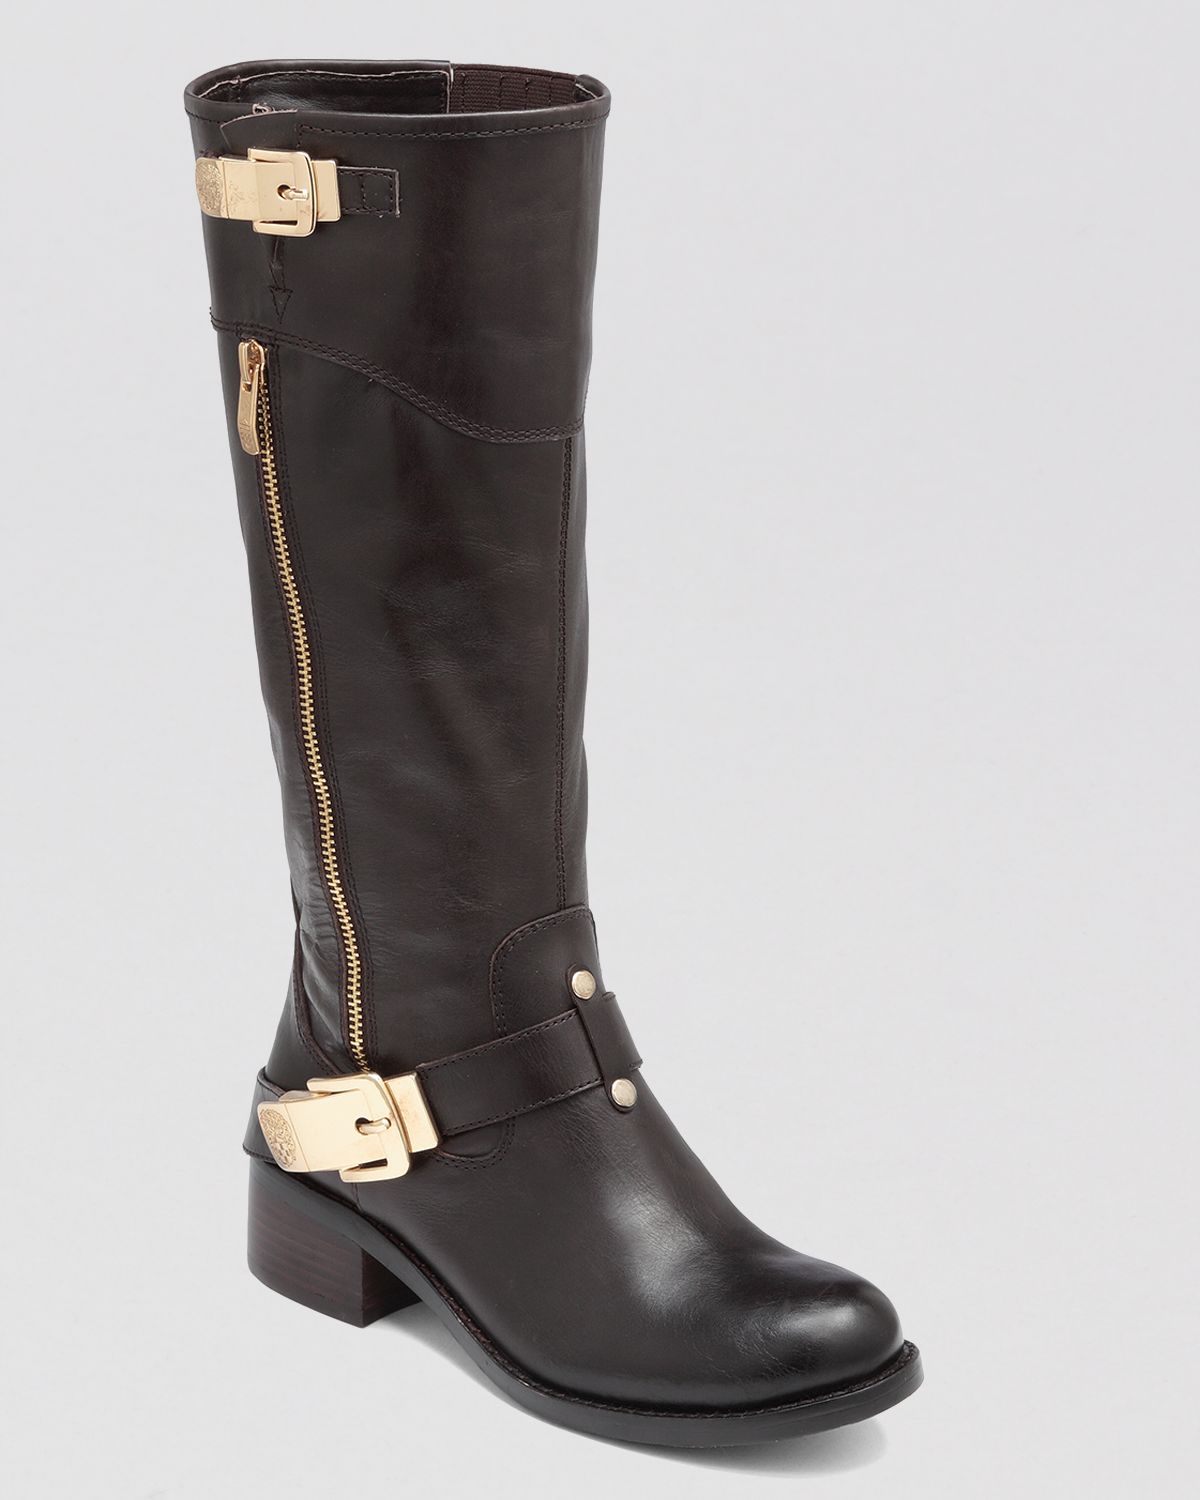 Vince Camuto Tall Boots Waymin Moto in Brown - Lyst